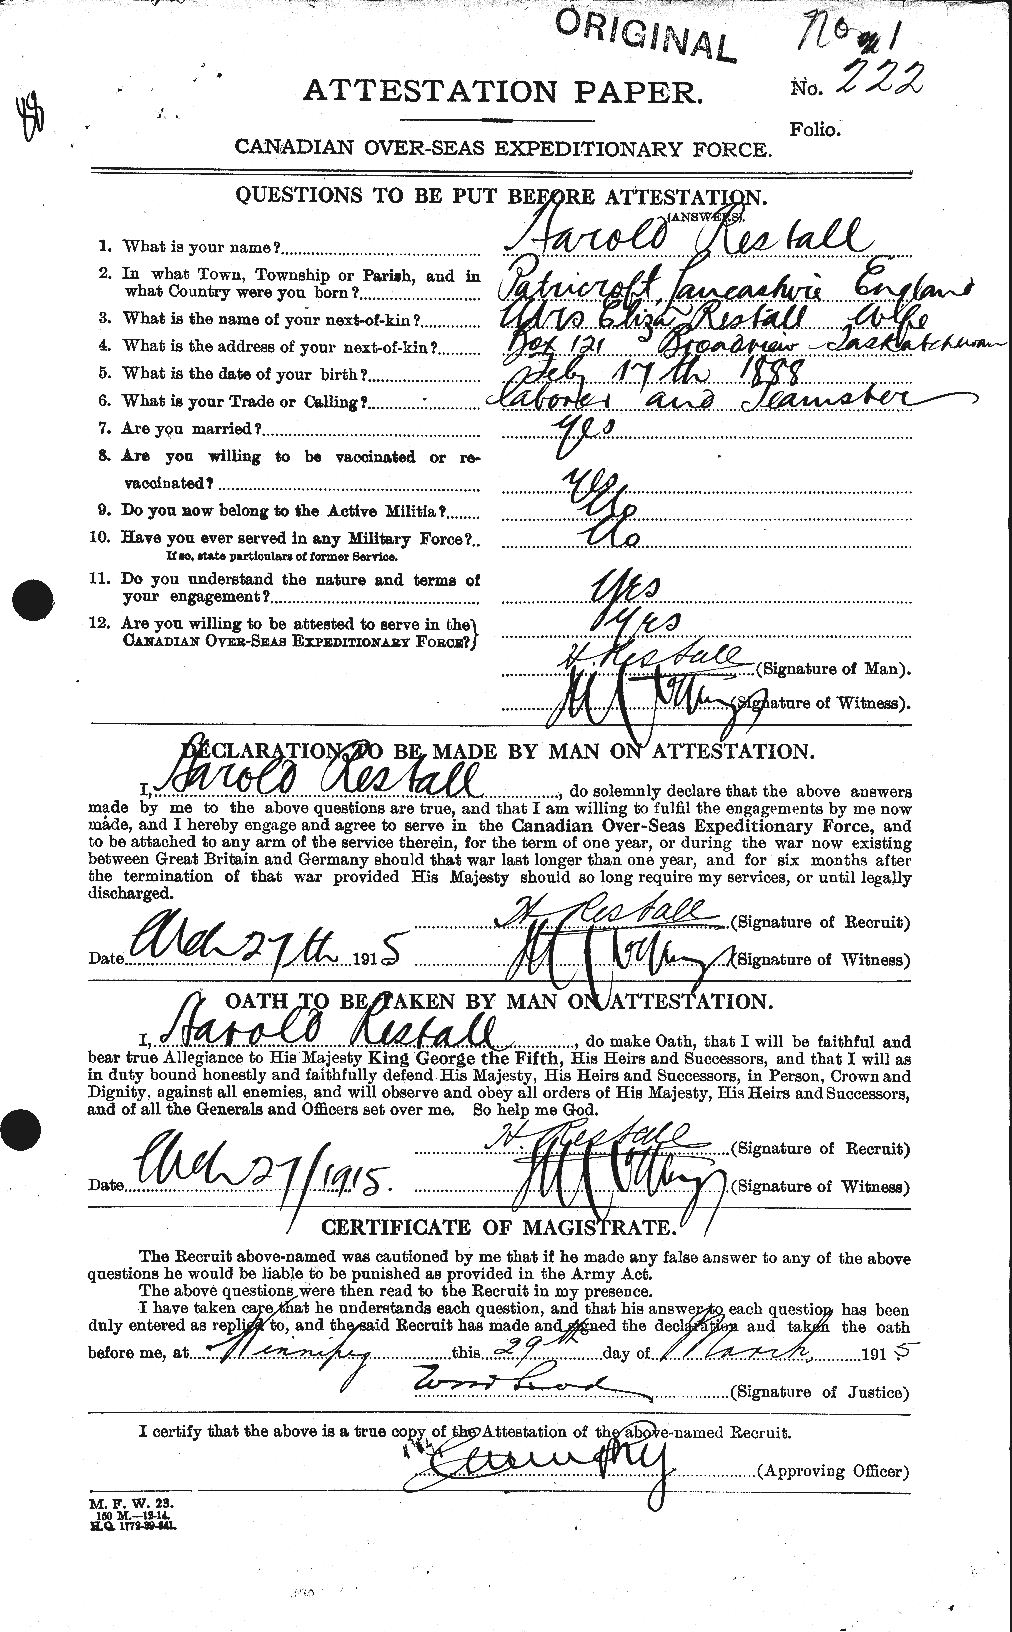 Personnel Records of the First World War - CEF 598087a